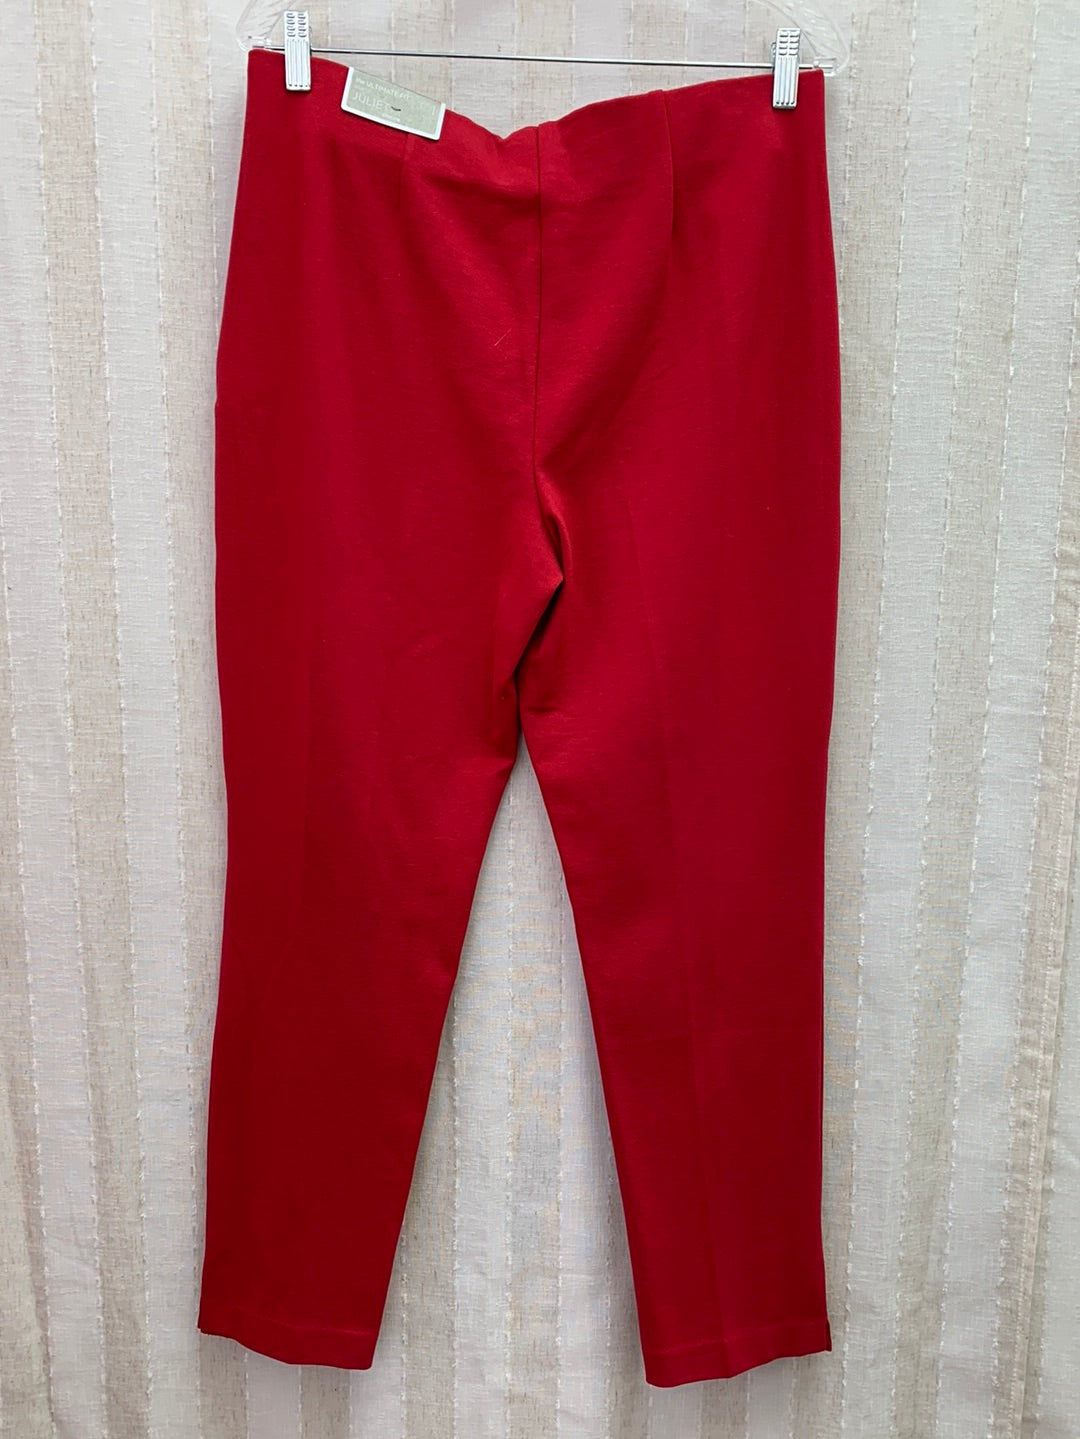 NWT - CHICO'S red Ponte Slimming Juliet Ankle Pants - 1